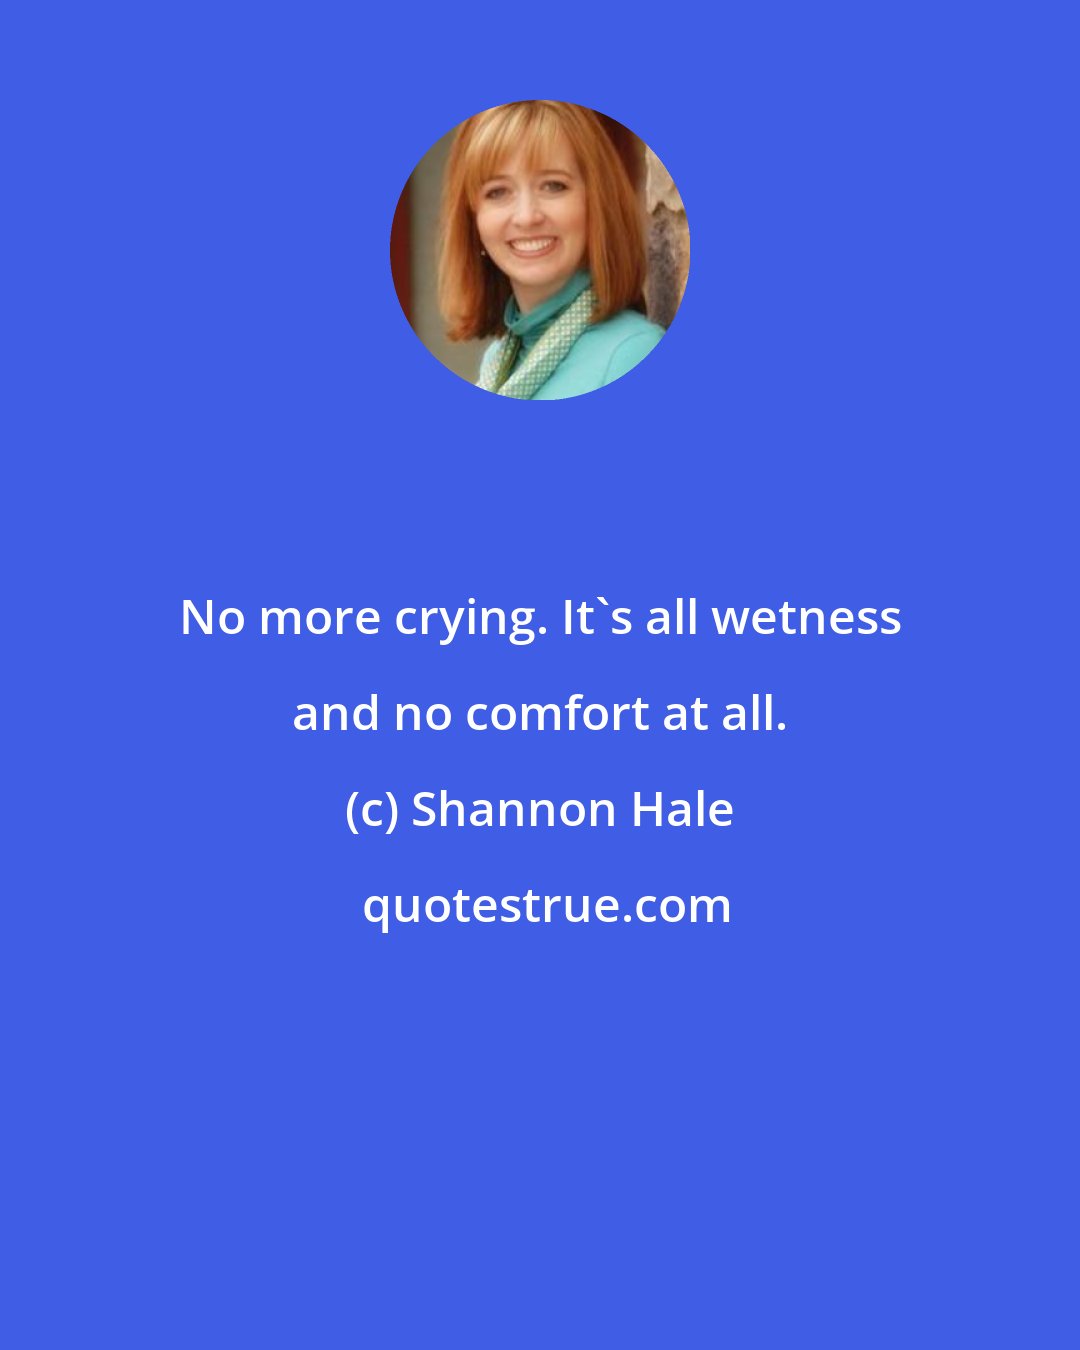 Shannon Hale: No more crying. It's all wetness and no comfort at all.